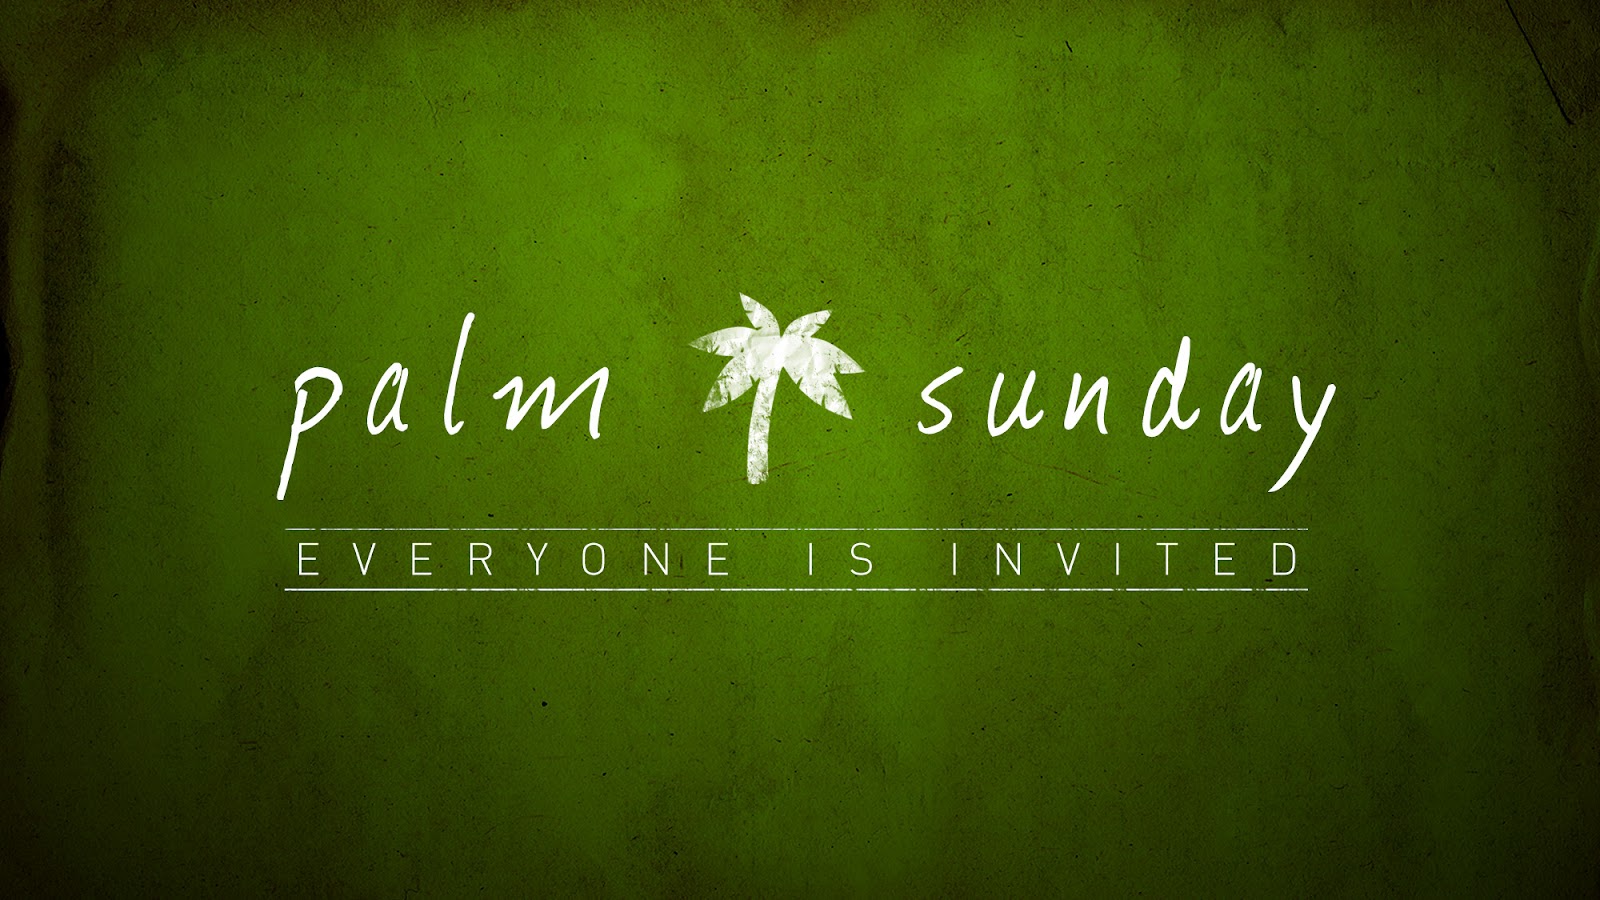 Holy Palm Sunday Inspirational Quotes And Sayings Pictures Image